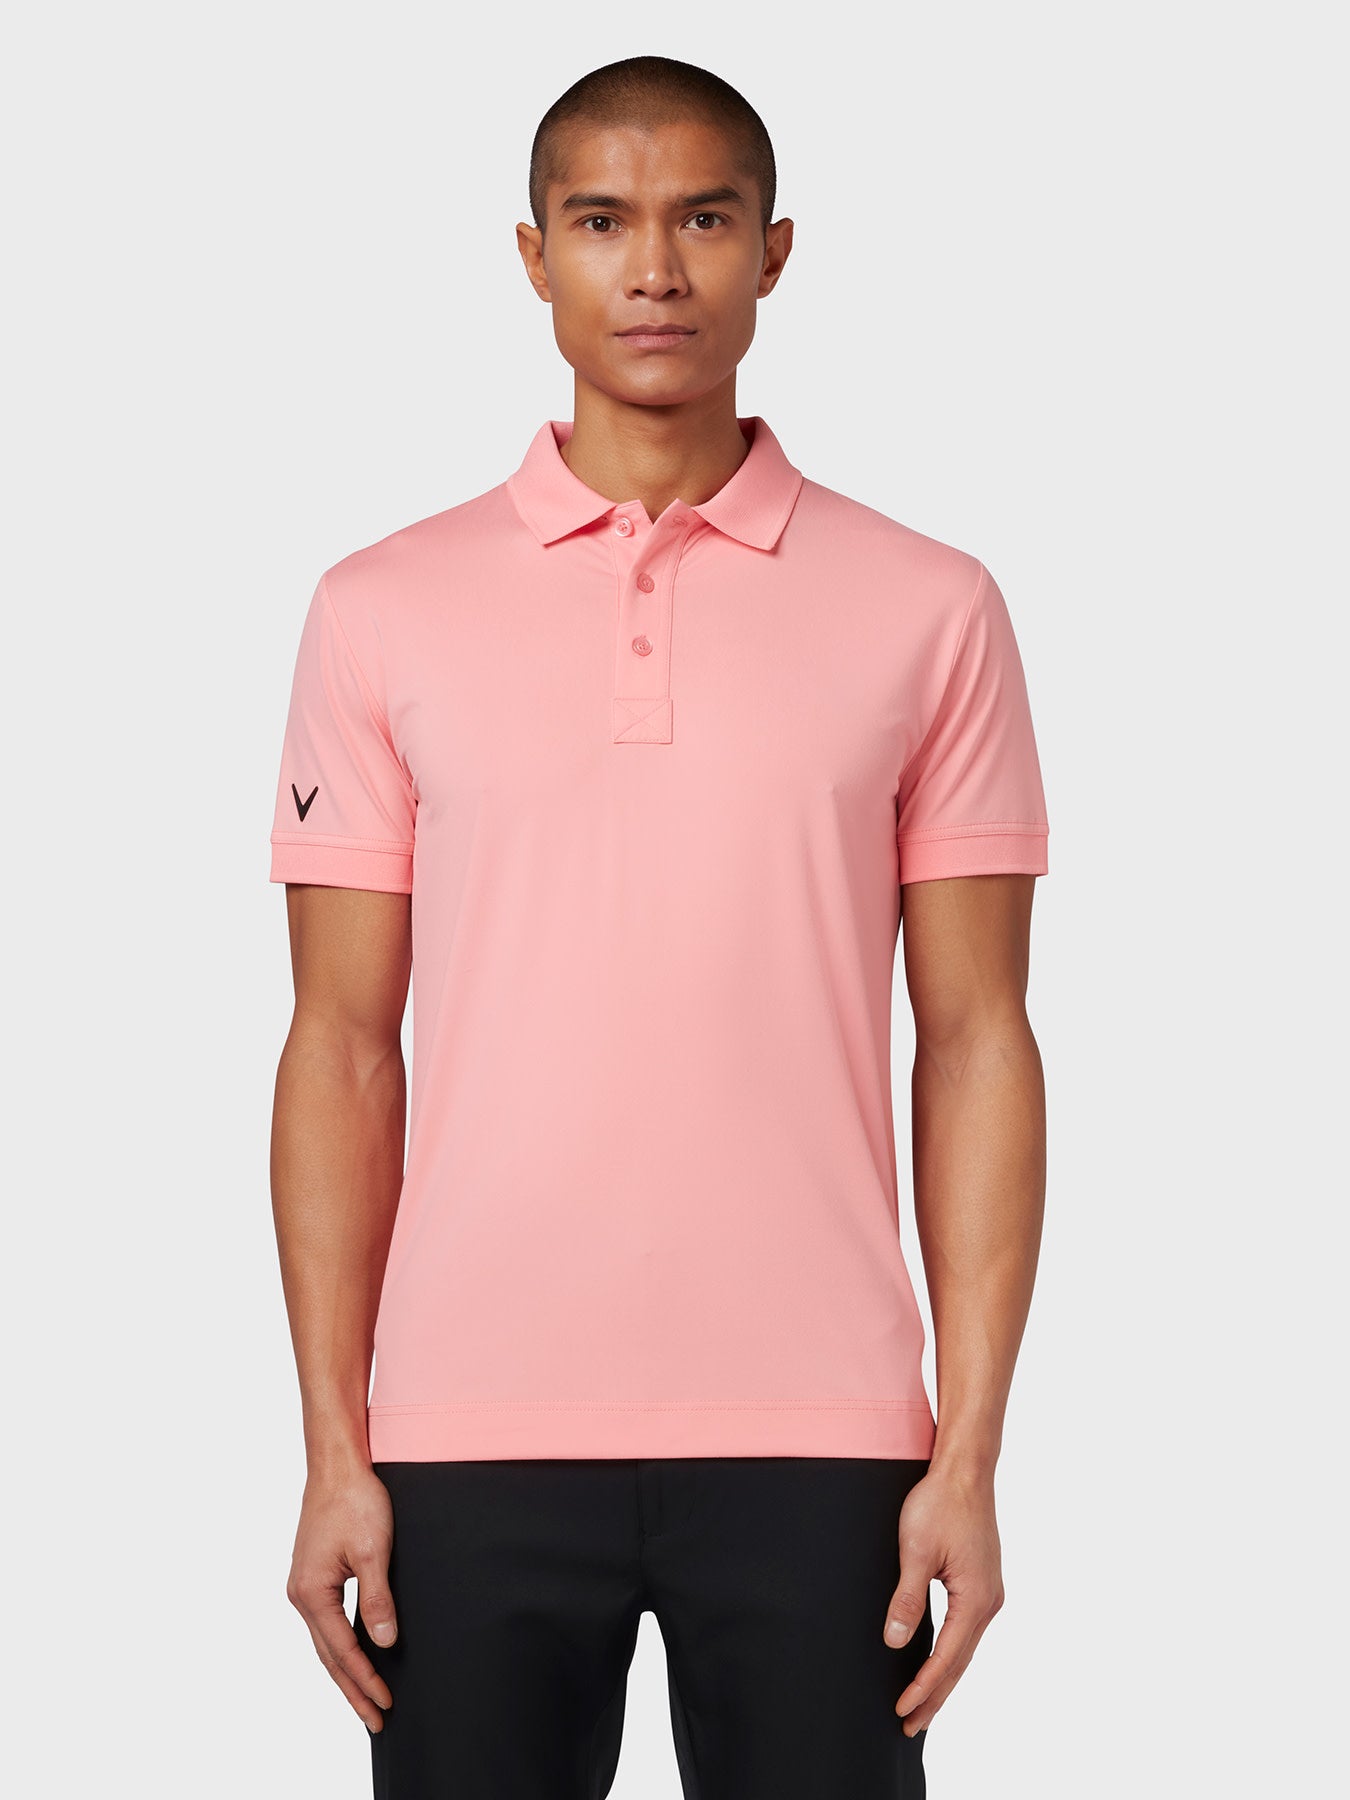 View X Series Solid Ribbed Polo In Geranium Pink Geranium Pink M information